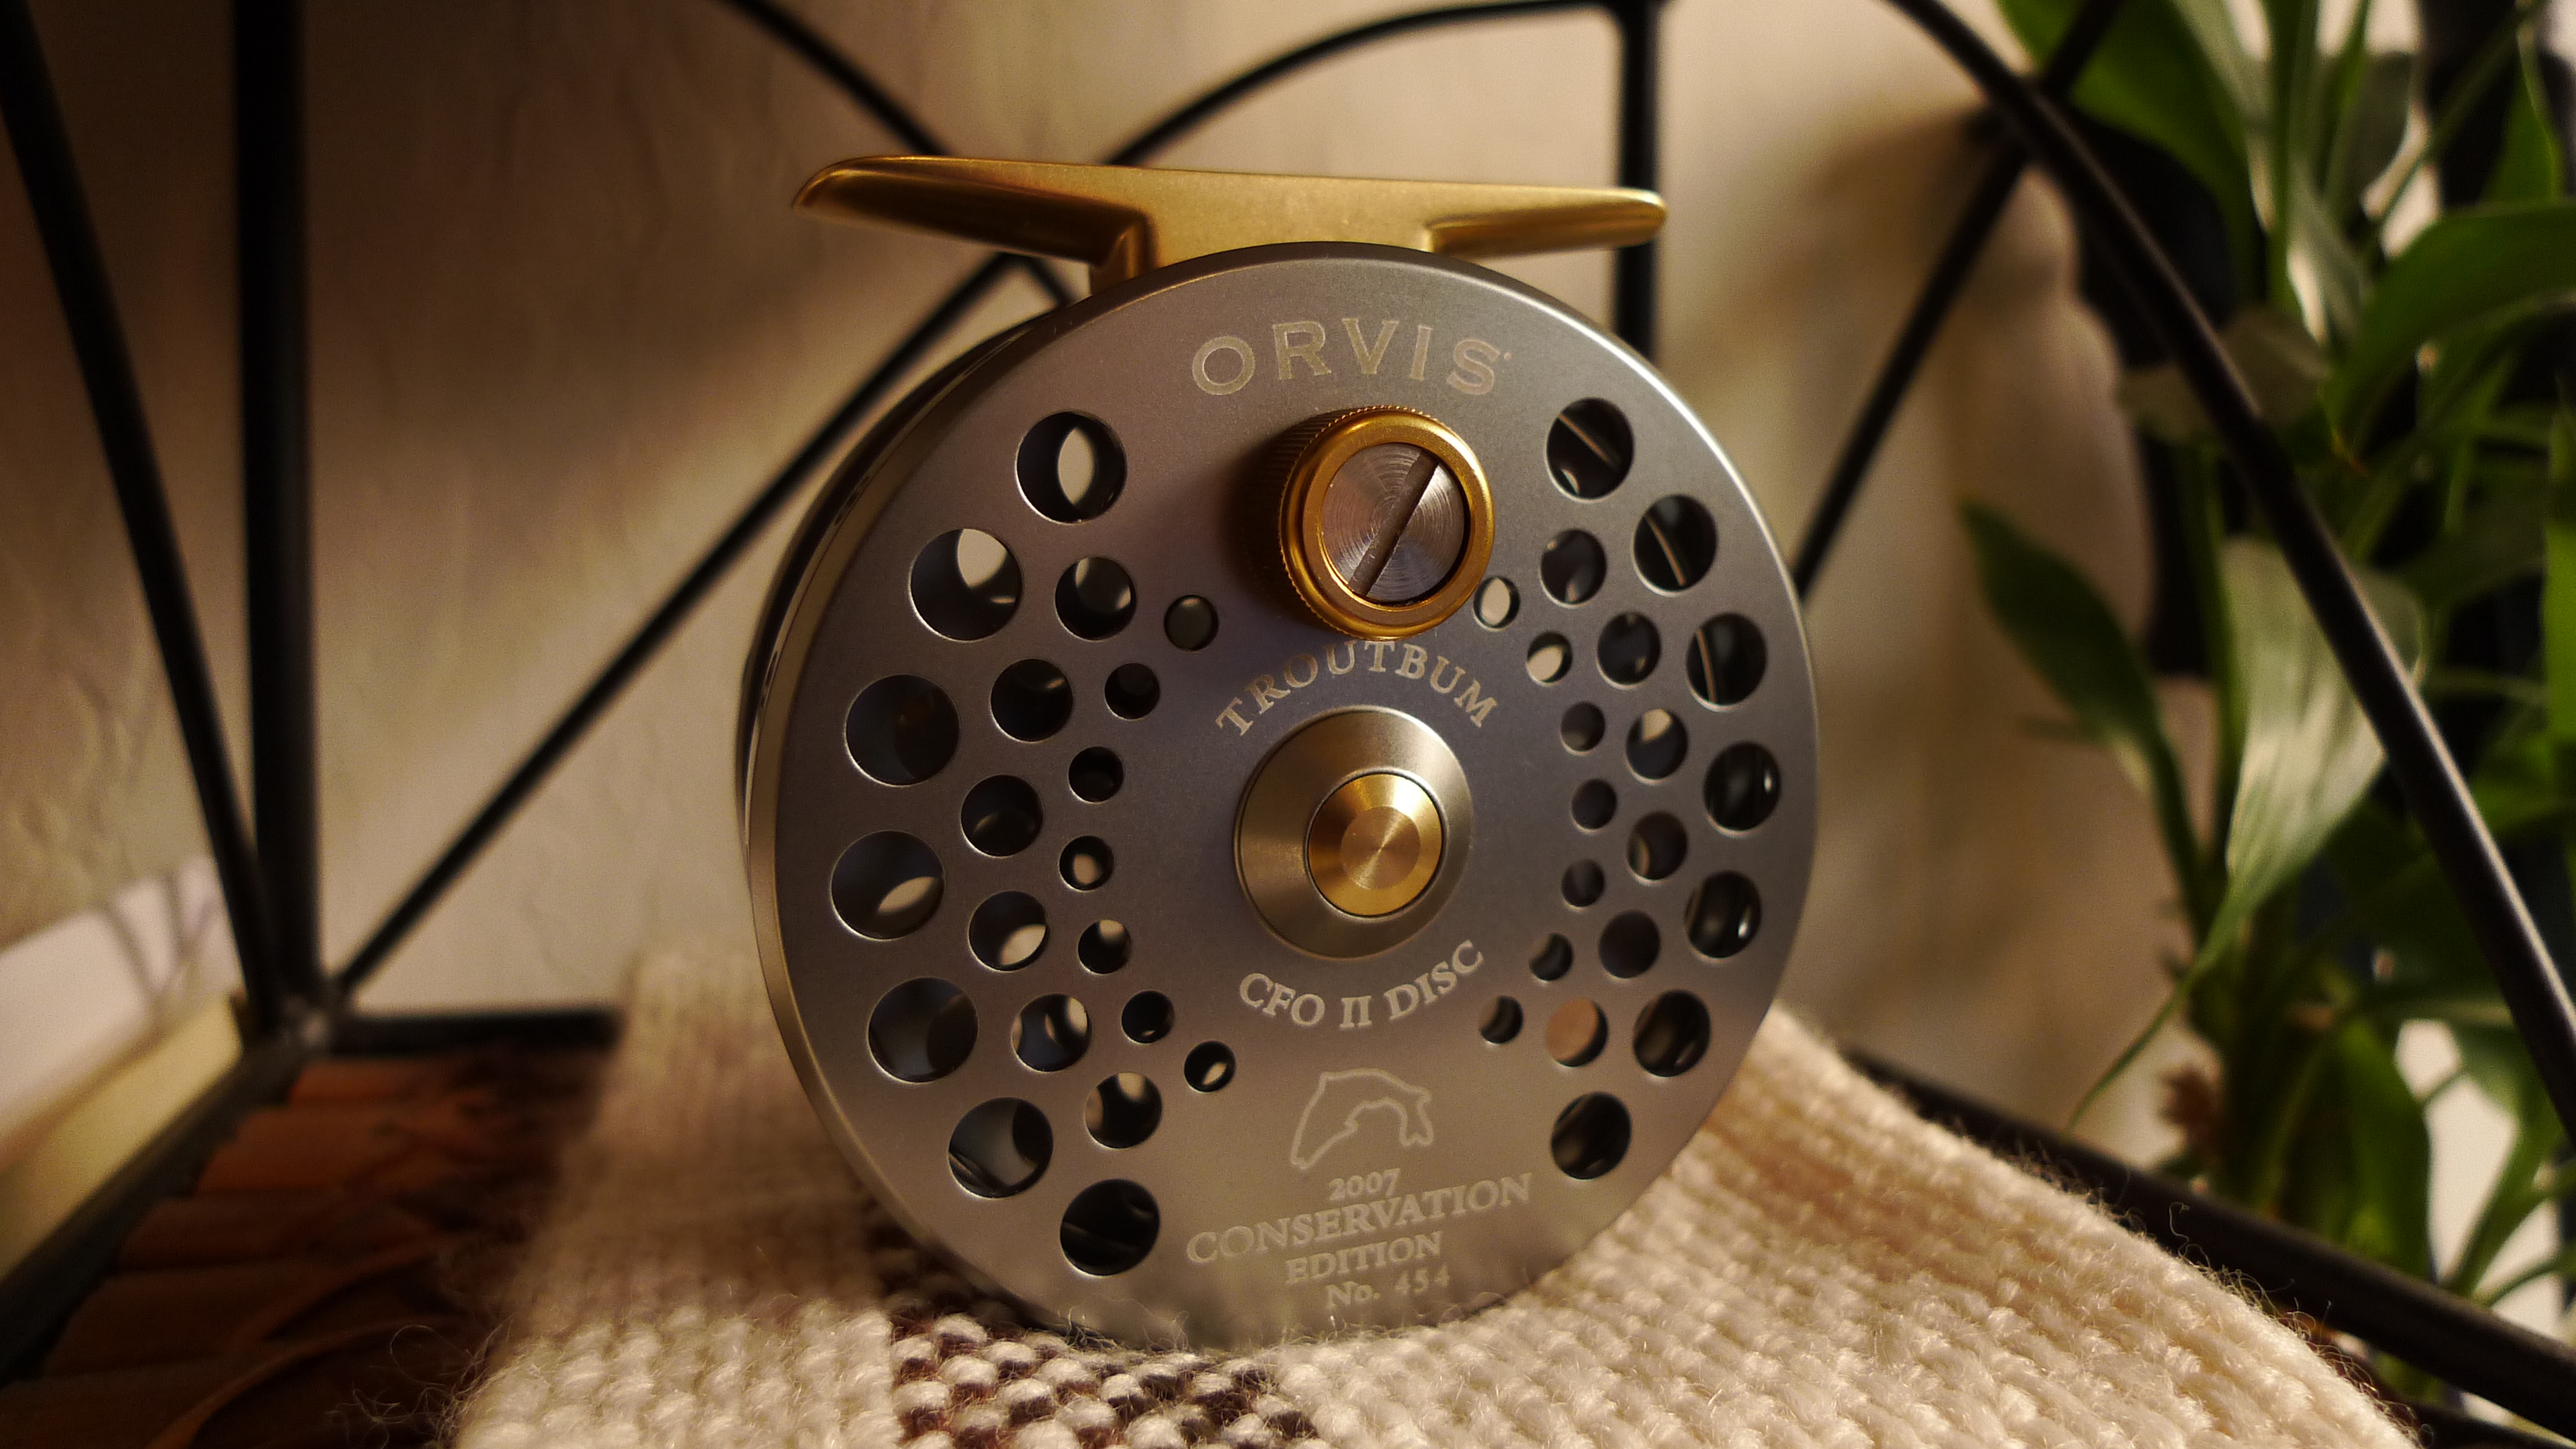 Orvis CFO II Trout Bum Limited Edition Conservation 454/750